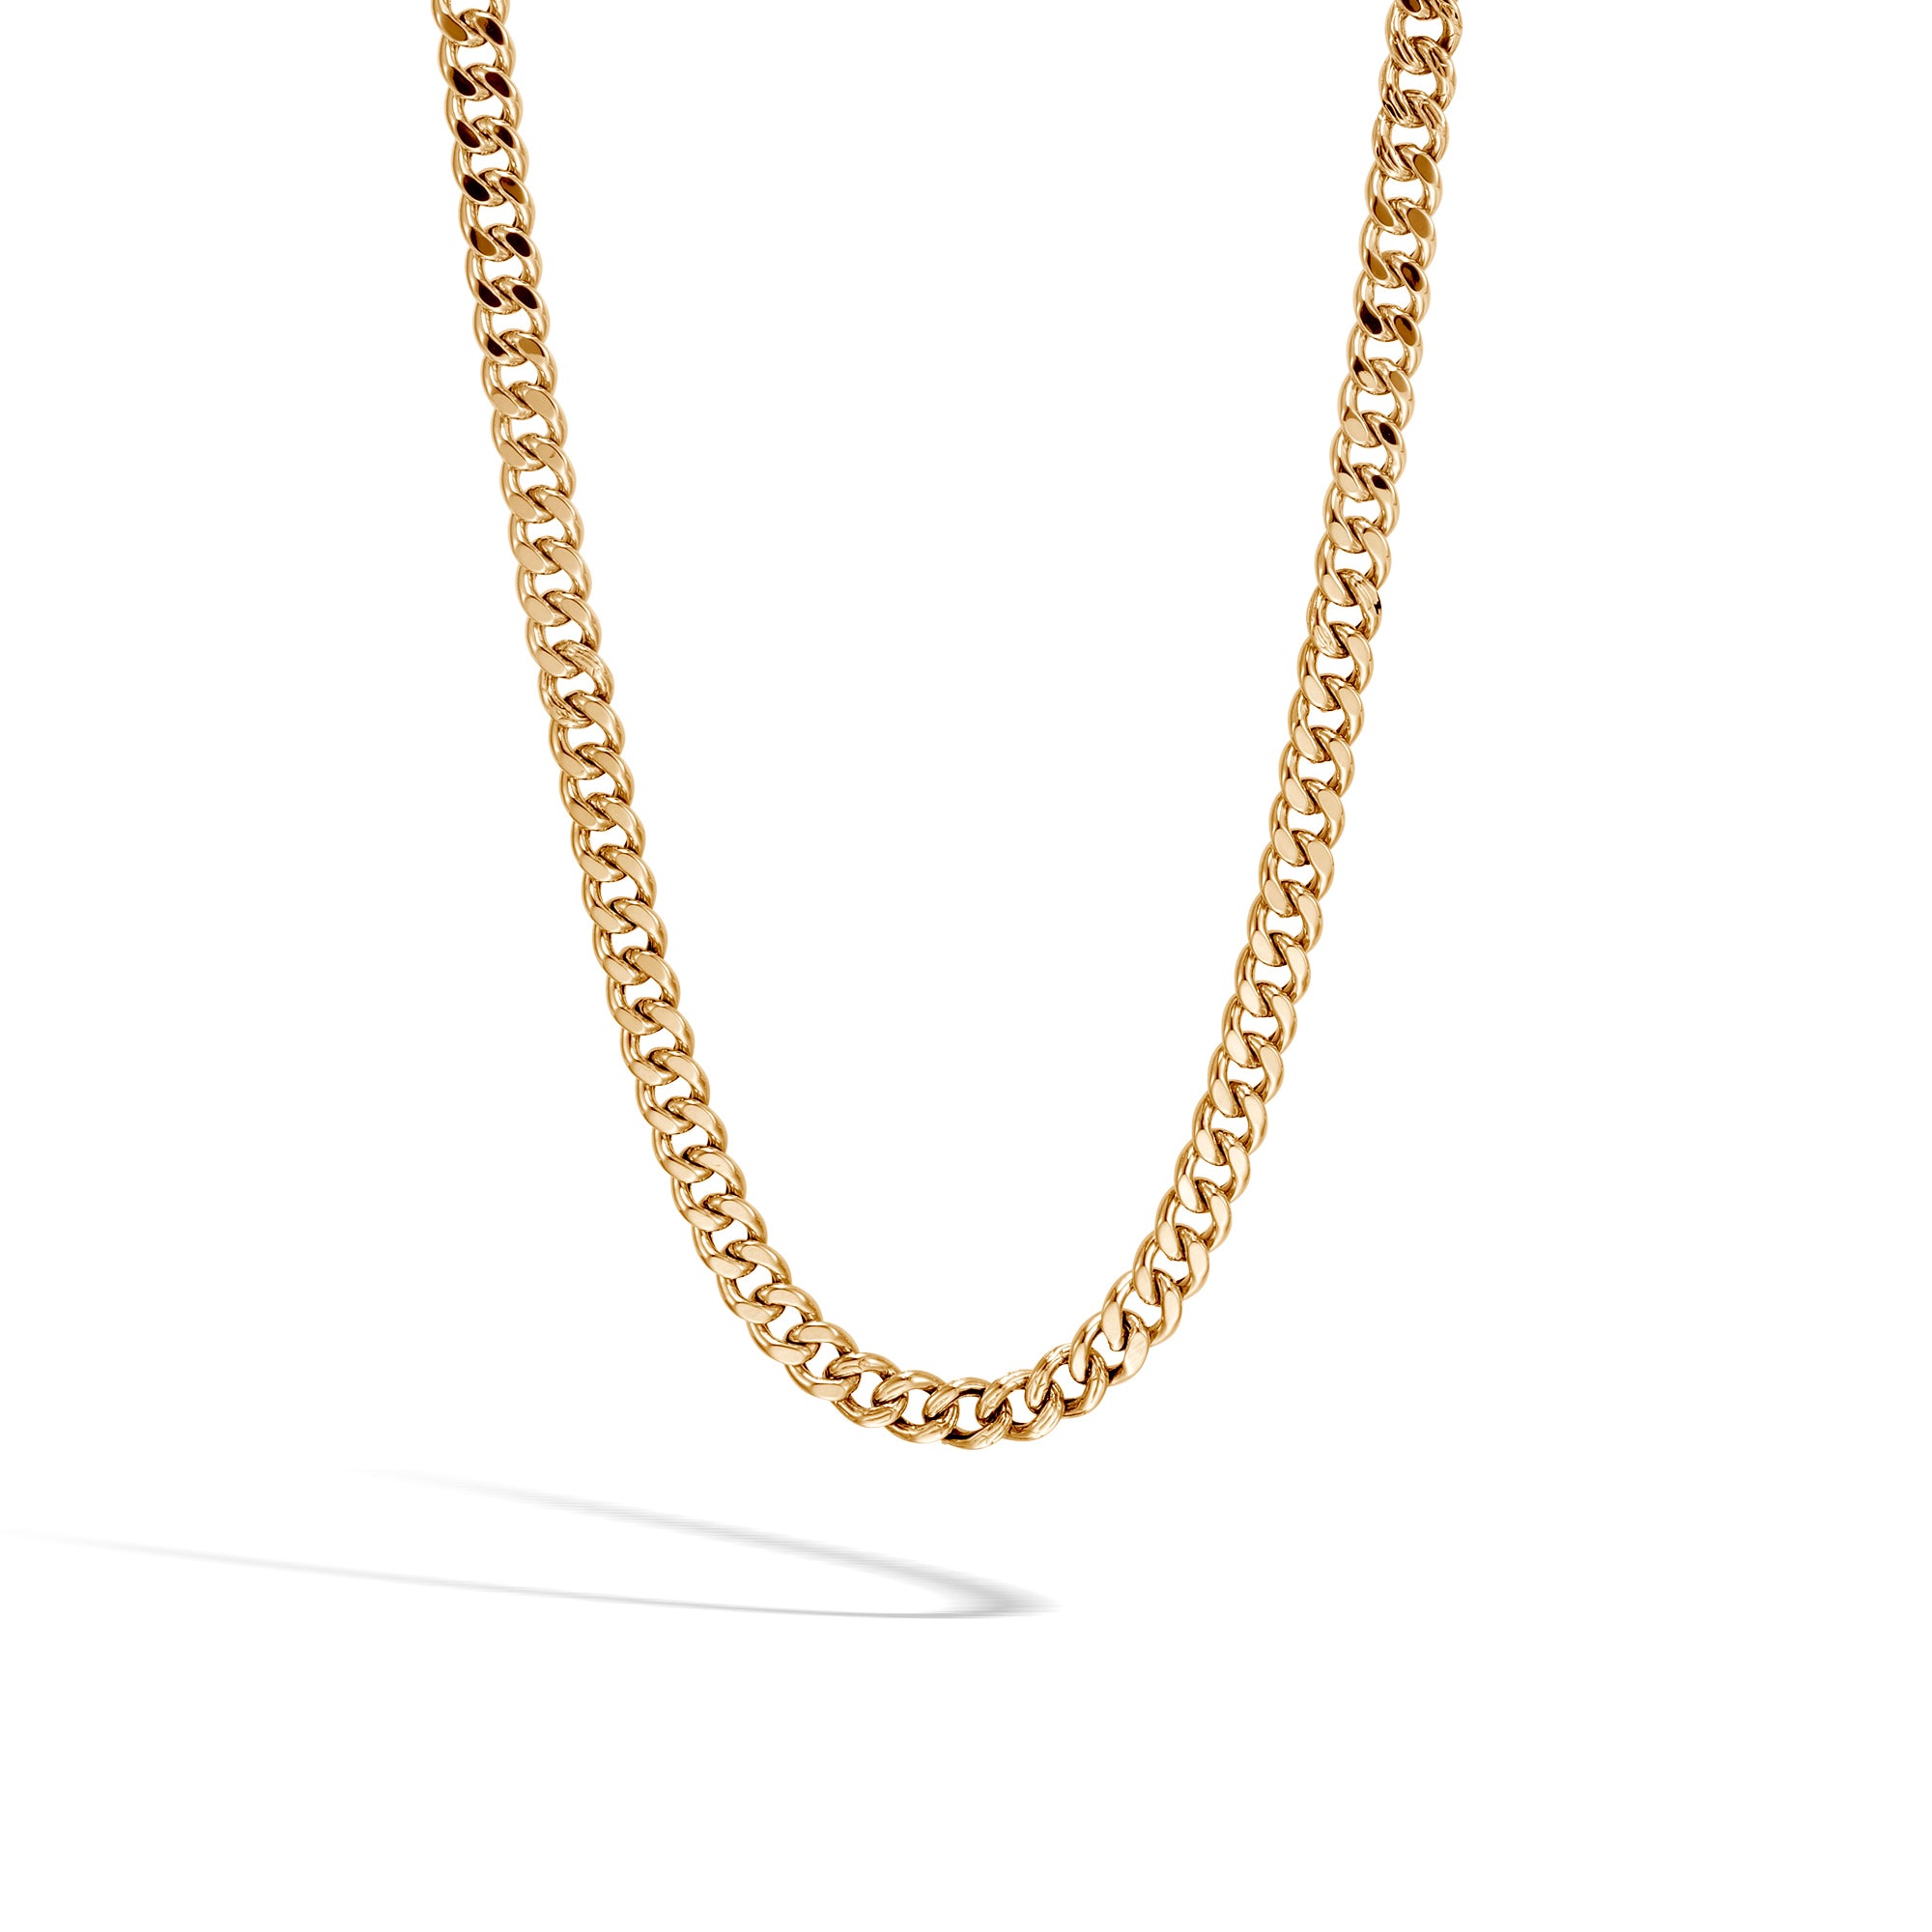 John Hardy Gold Curb Chain Necklace 6.5MM, NMG90287